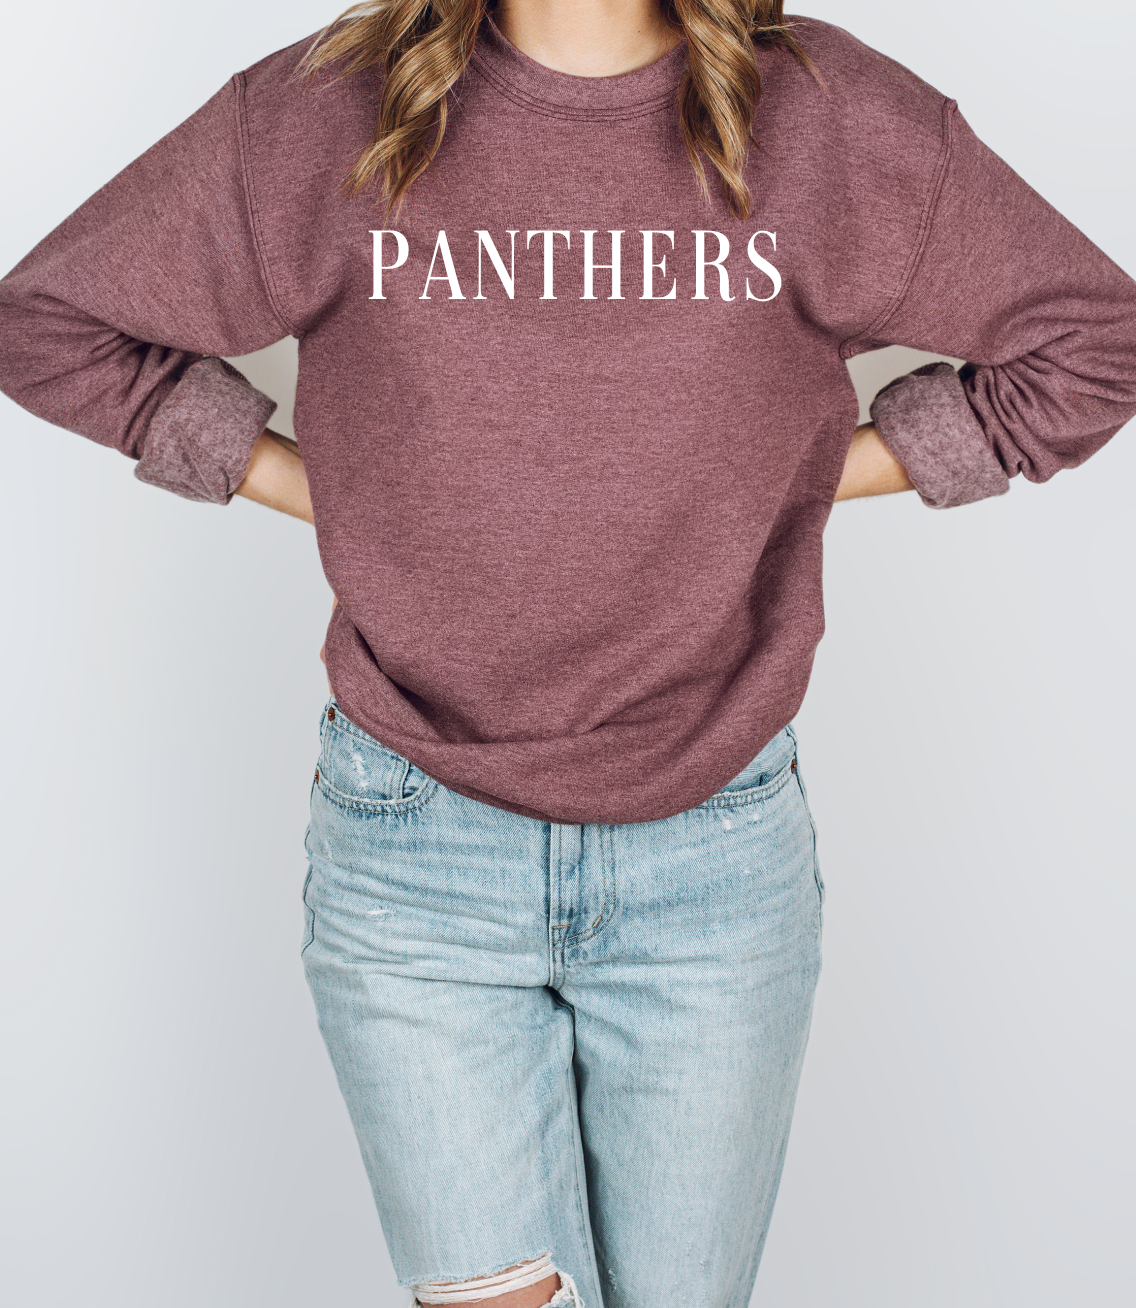 Panthers Crew Neck Sweater